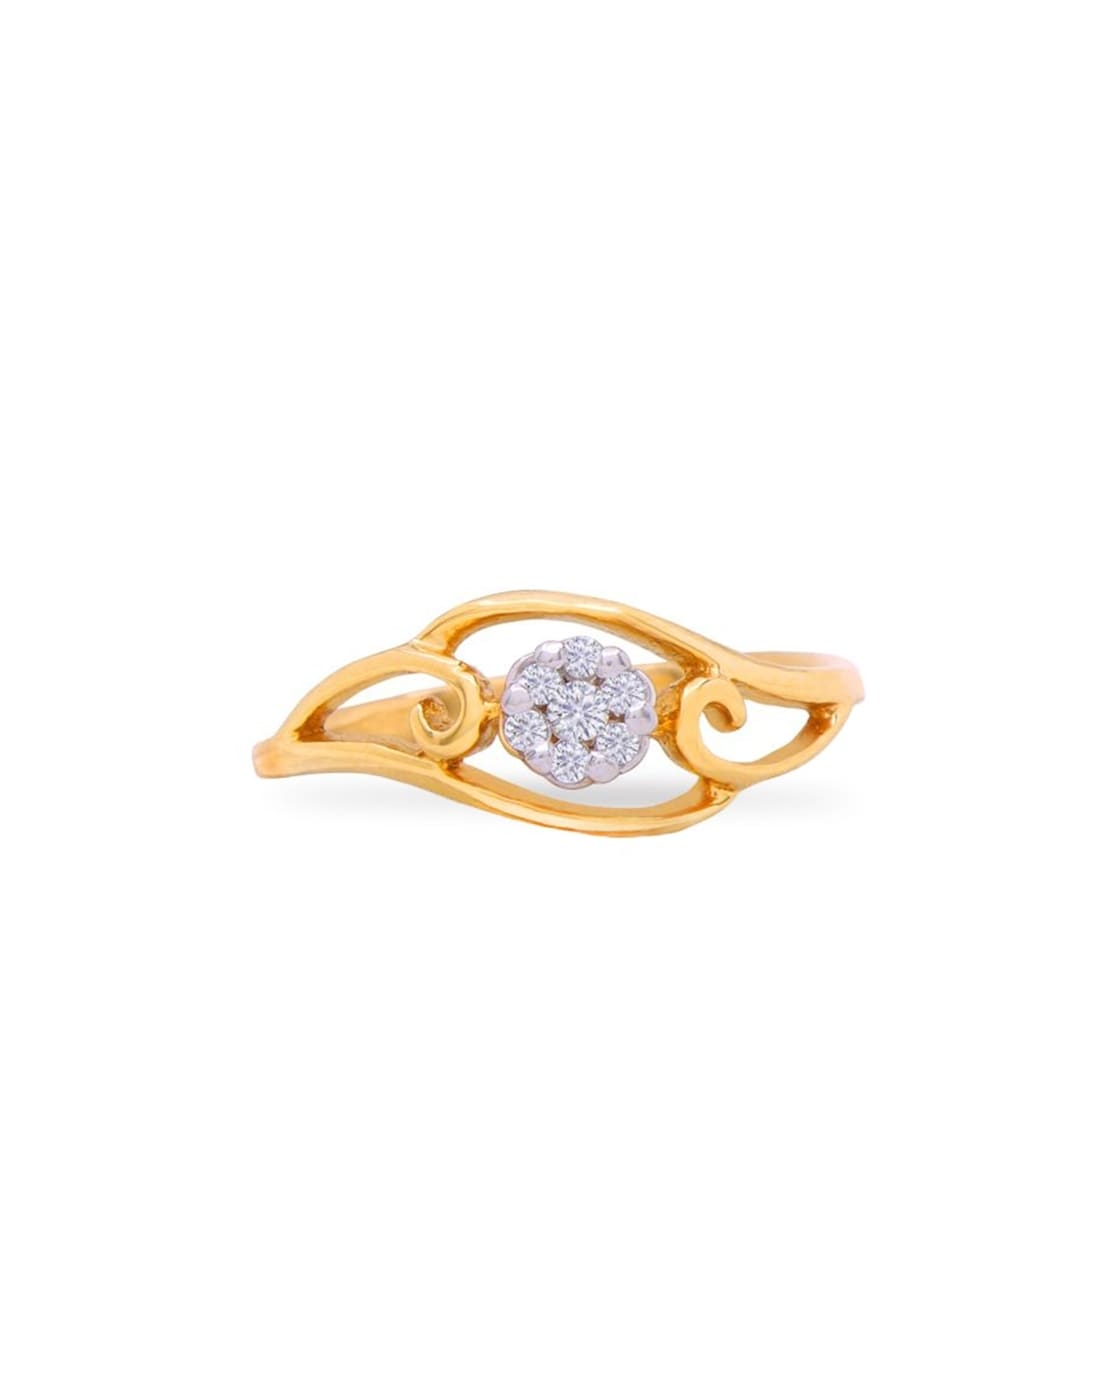 Waman Hari Pethe Sons - Here is our Exquisite #sparkling #GoldDiamond #ring  from our #glittering collection. Click here to view more:  http://bit.ly/1qmNw1b #Jewellerycollection #finejewellery #diamondring # goldring #rings #diamondjewellery ...